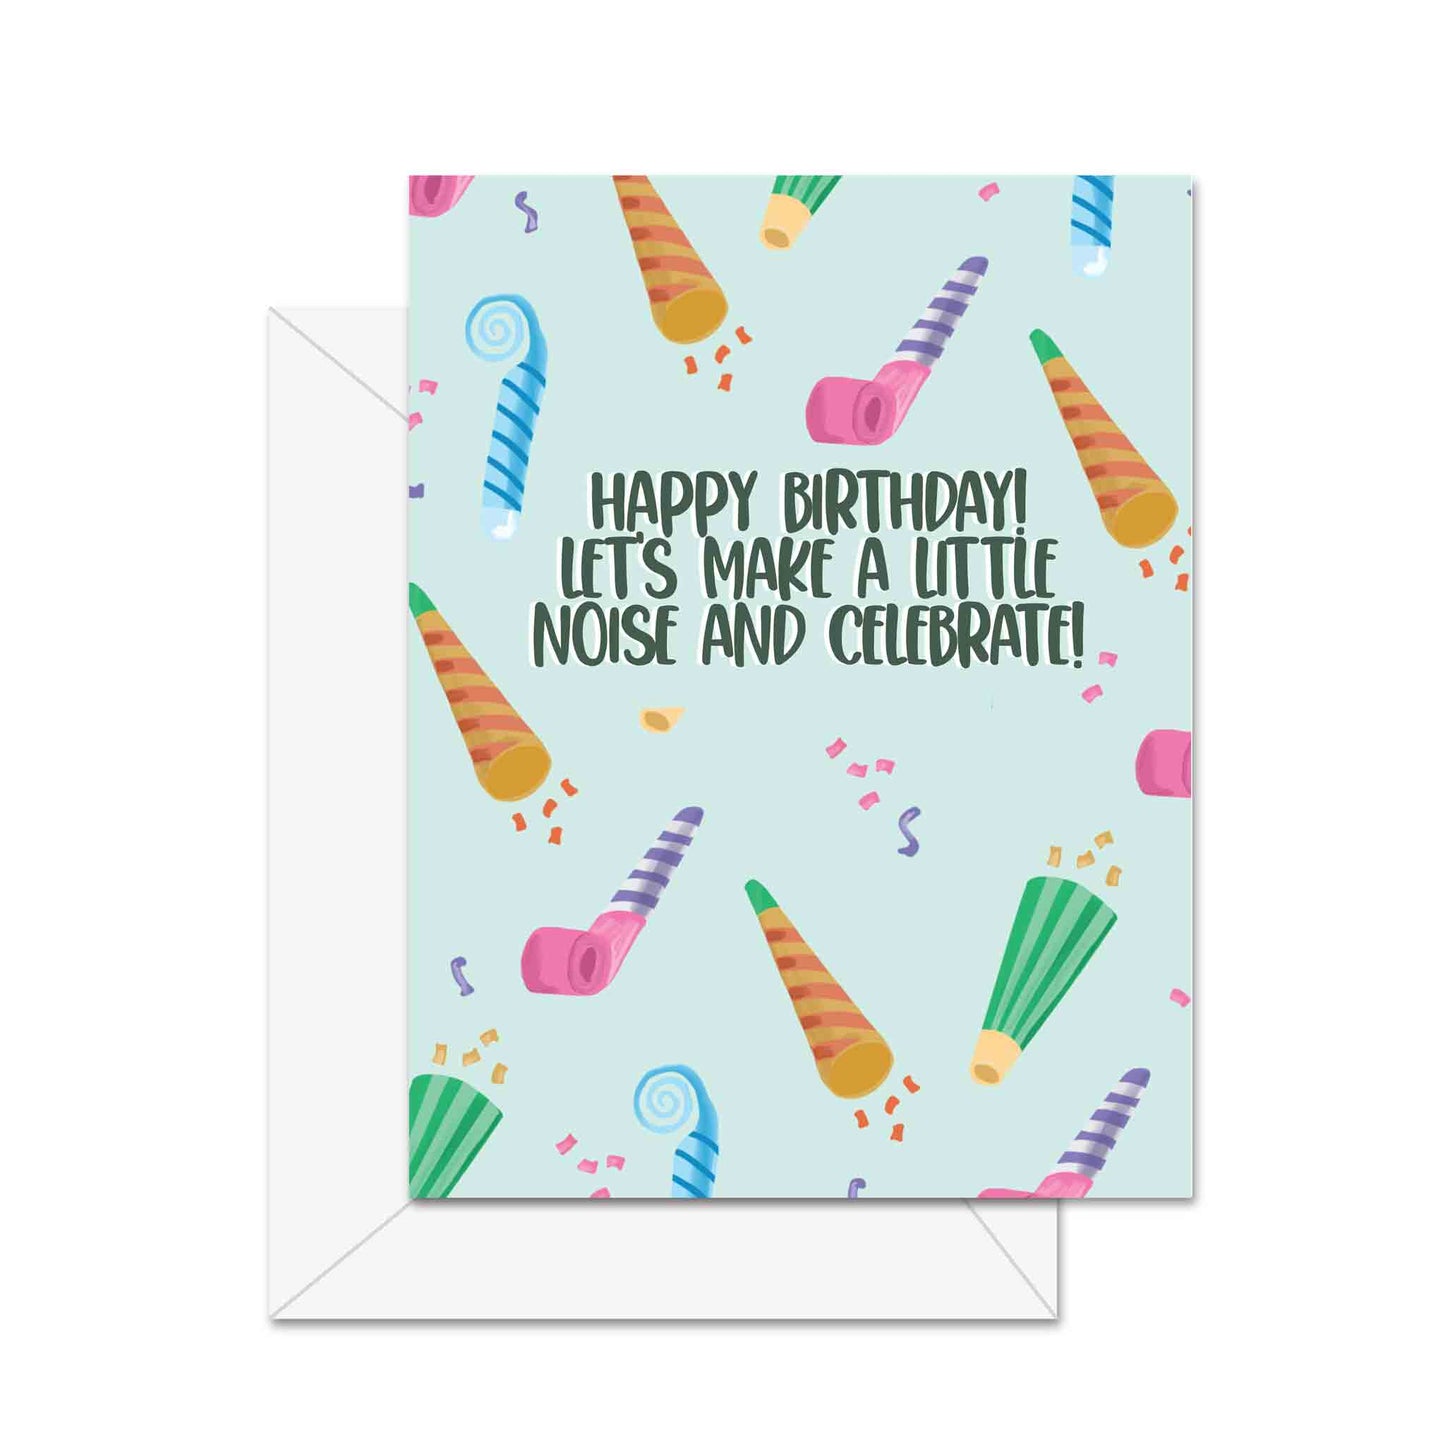 Happy Birthday! Lets Make A Little Noise And Celebrate!- Greeting Card